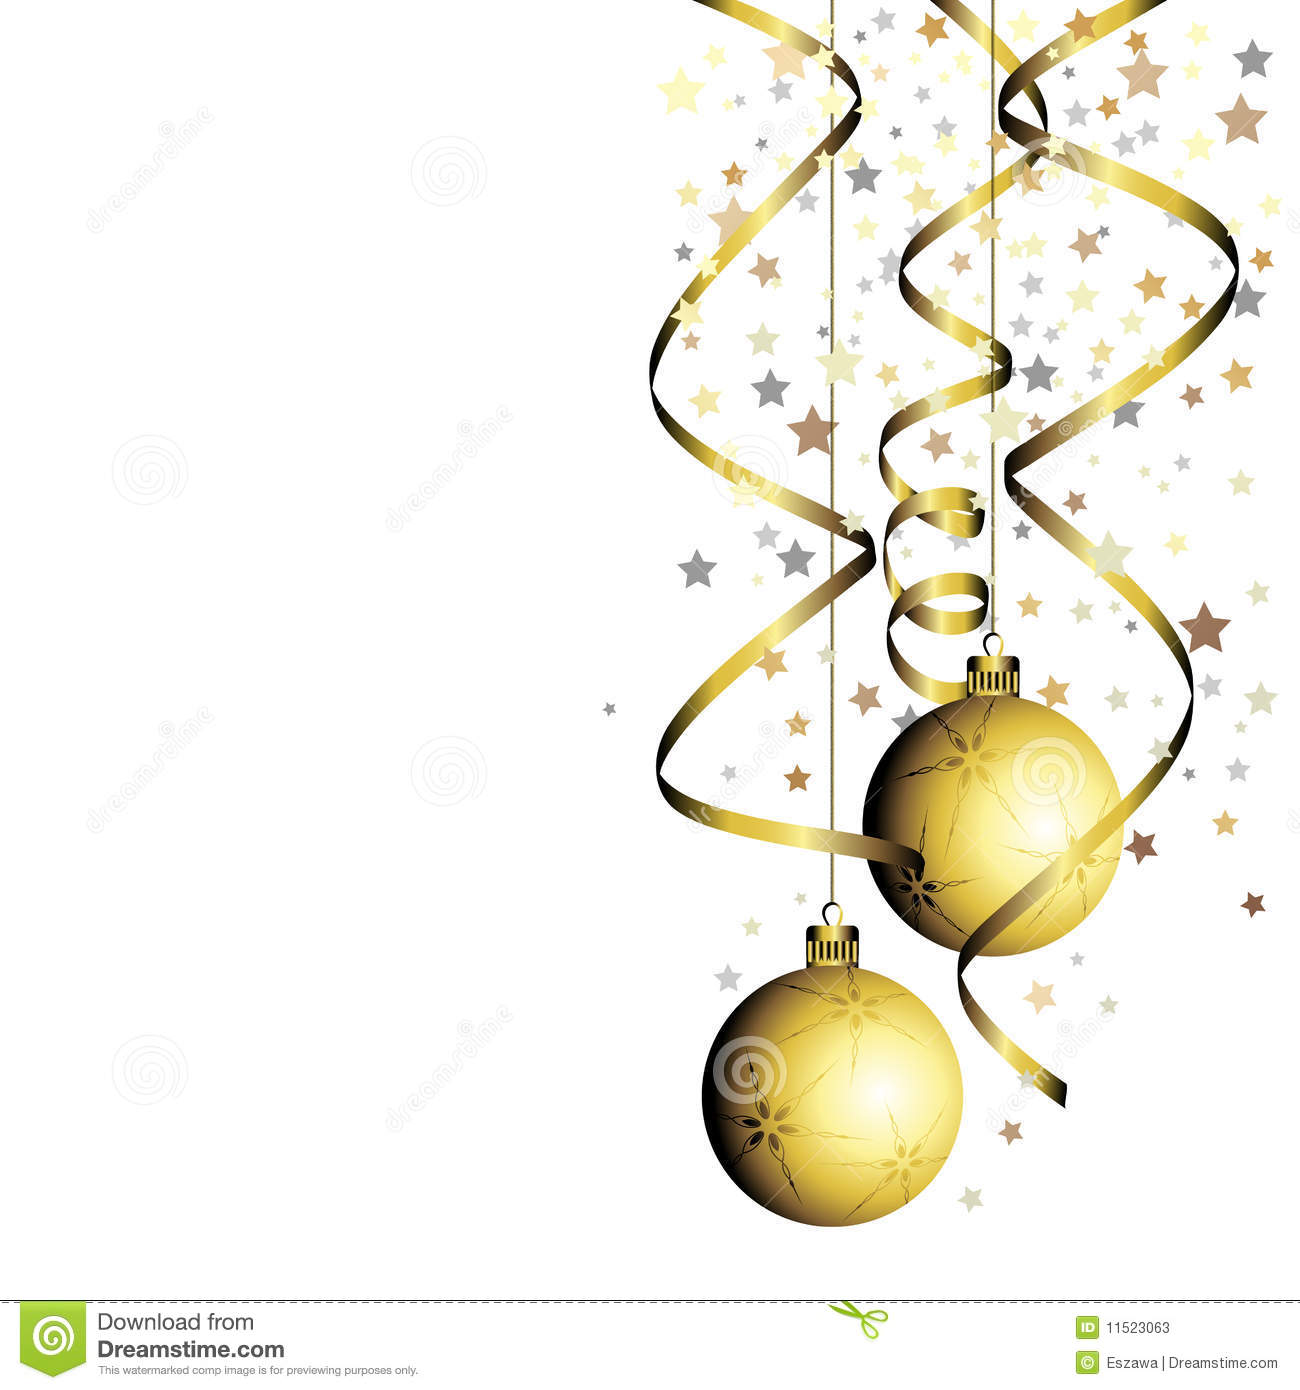 Christmas Ball With Curly Ribbon Stock Photos   Image  11523063